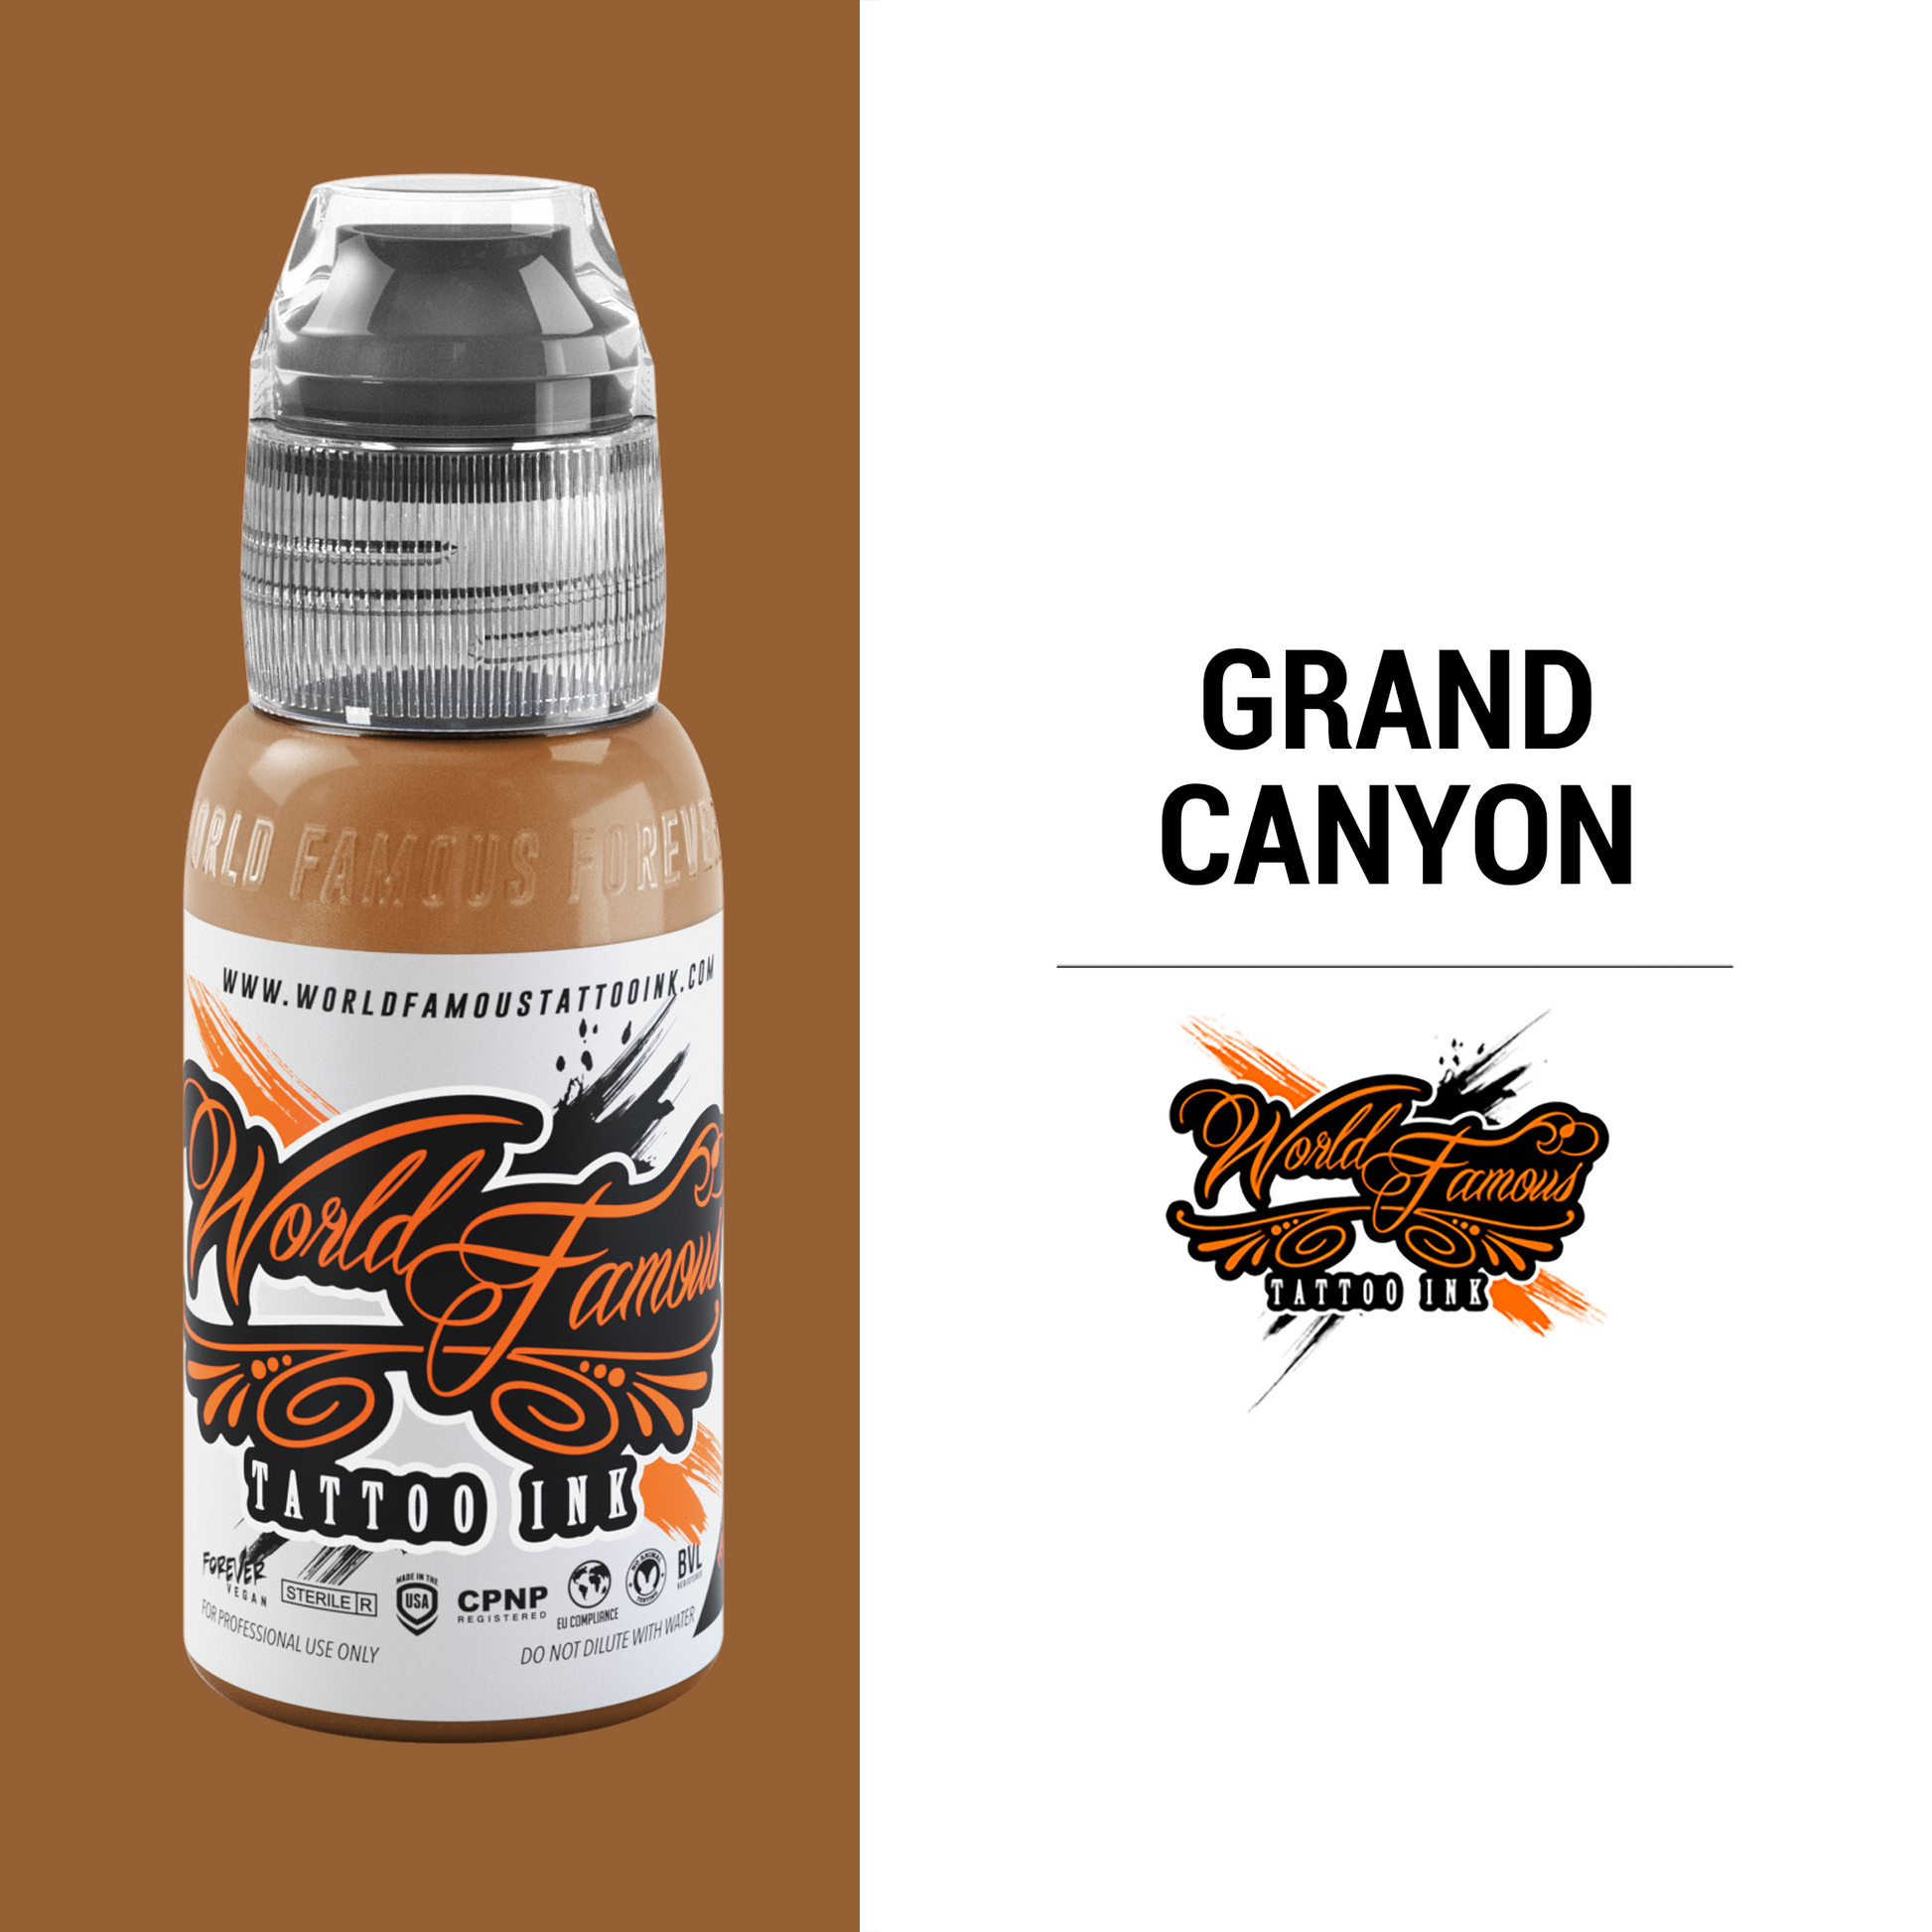 Grand Canyon | World Famous Tattoo Ink